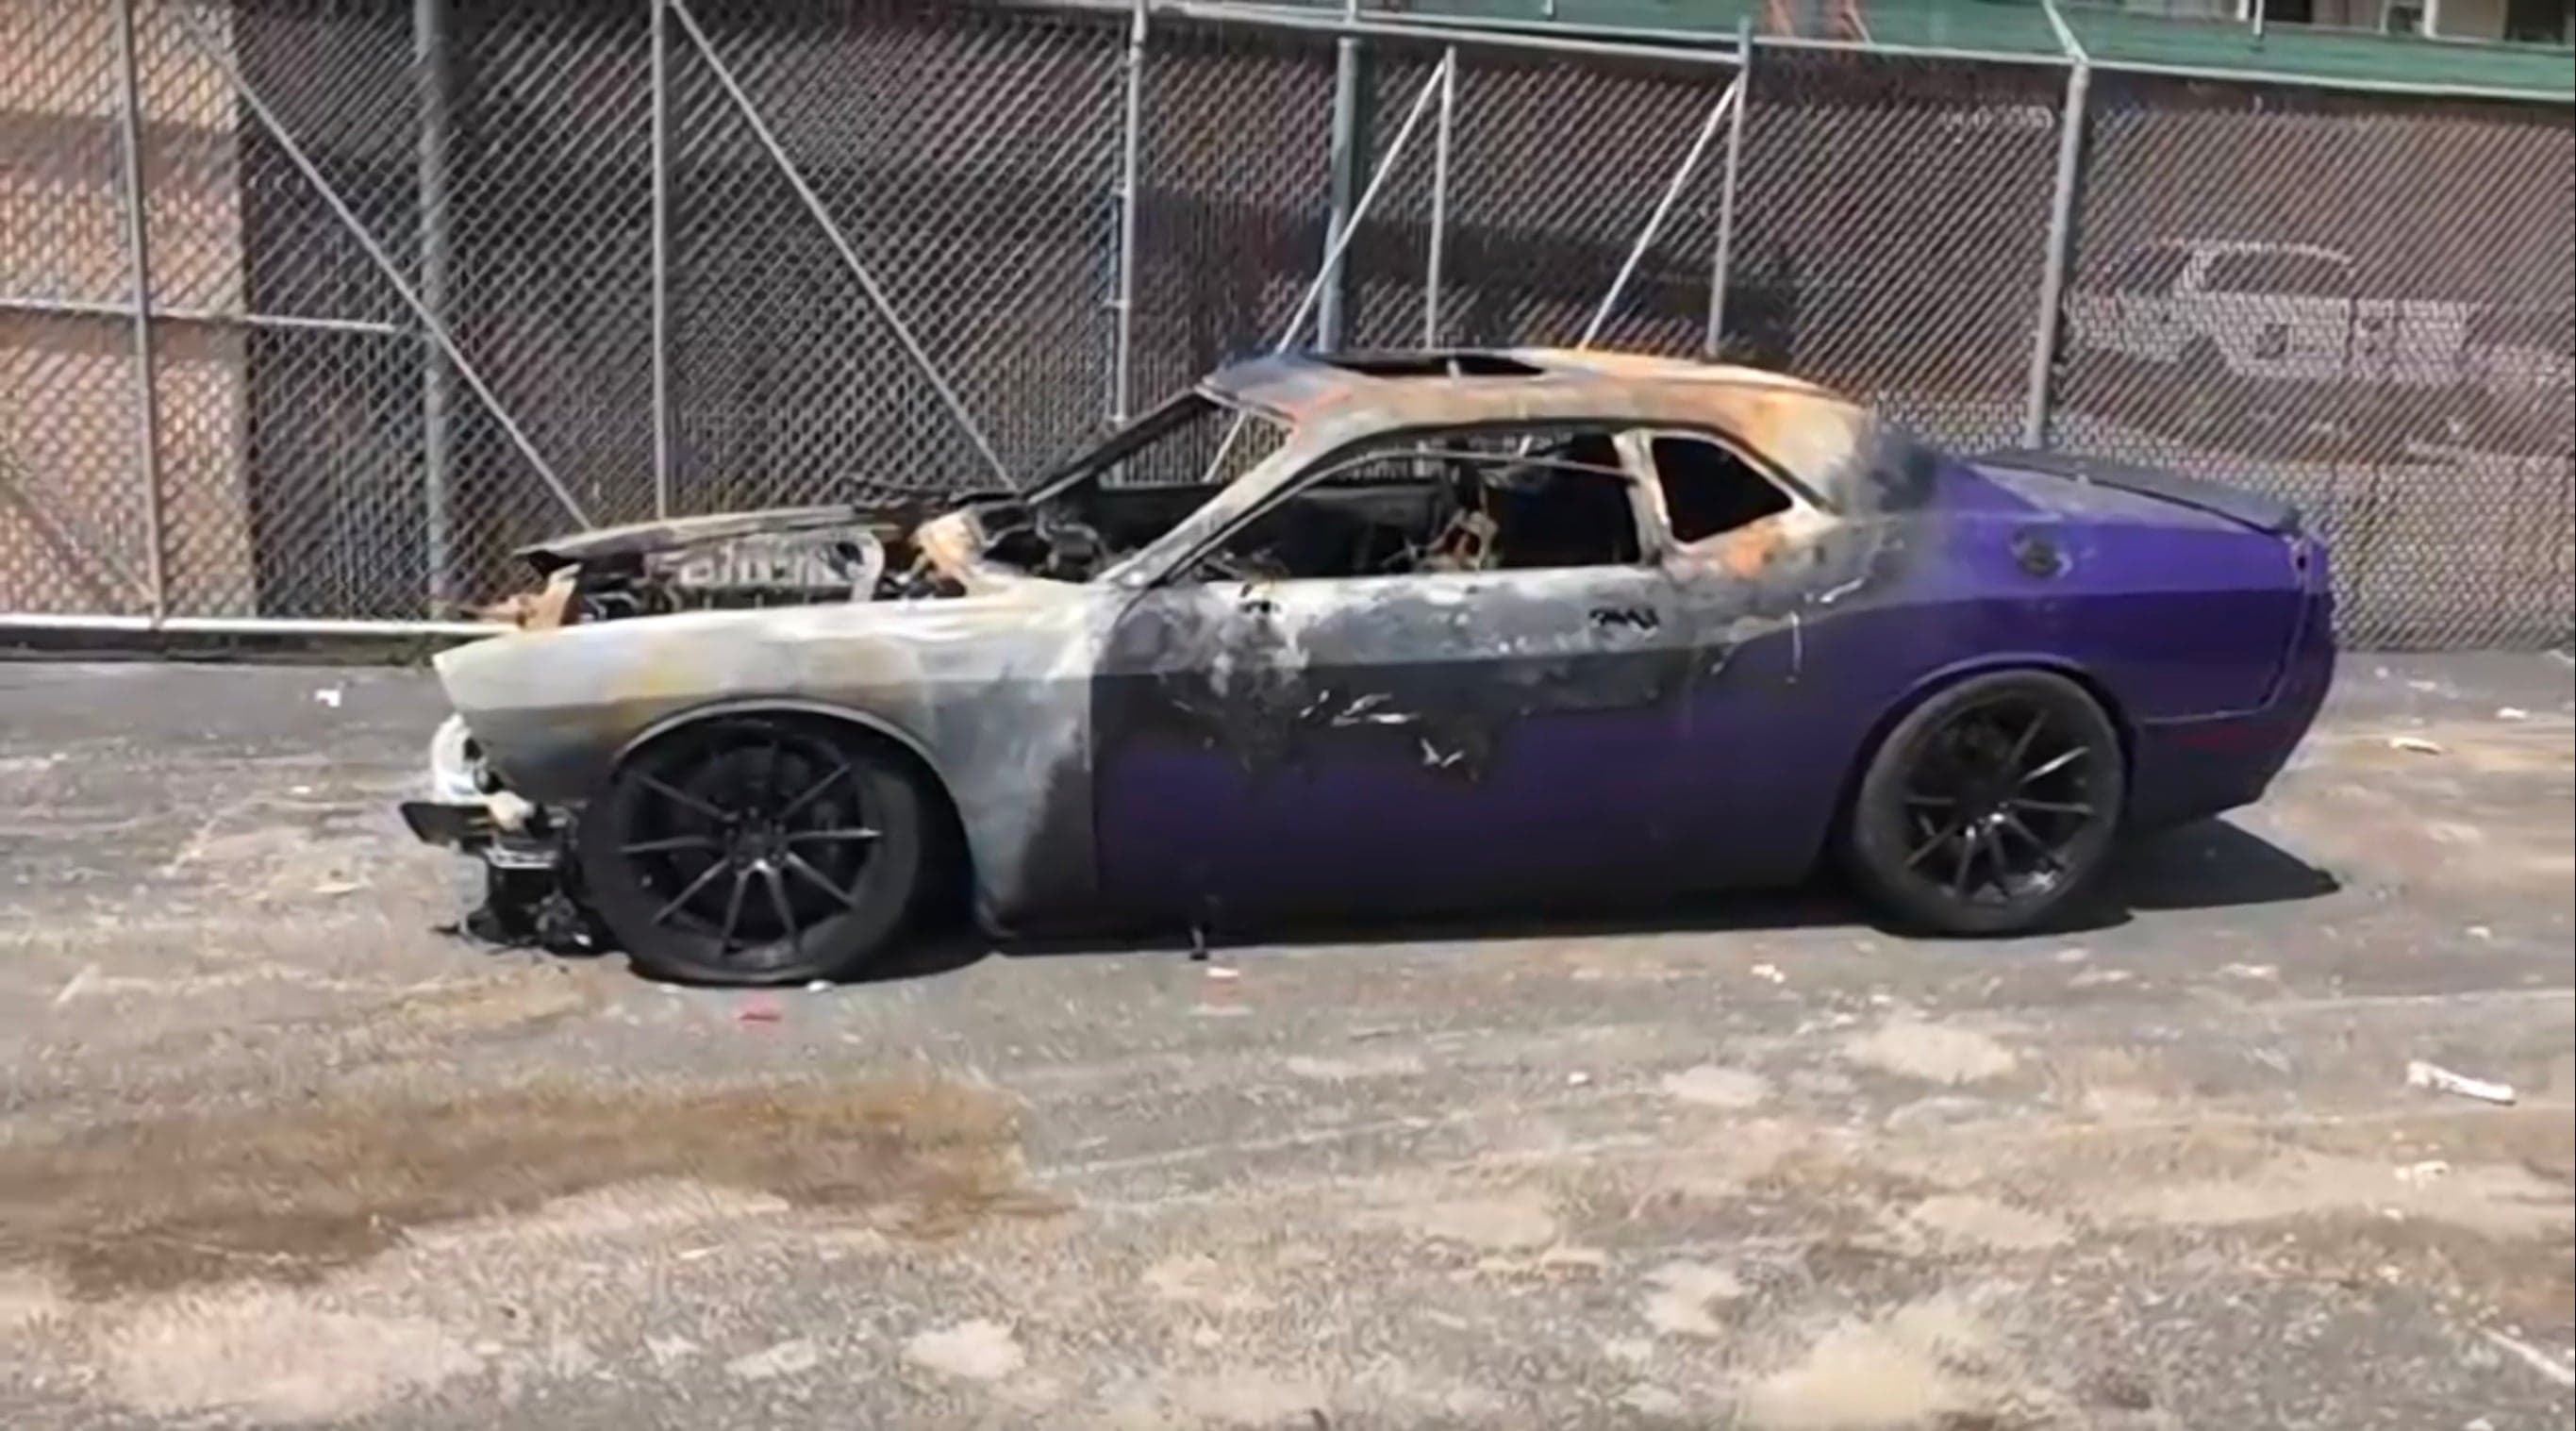 Dodge Hellcat Owner Records His Car Burning to the Ground